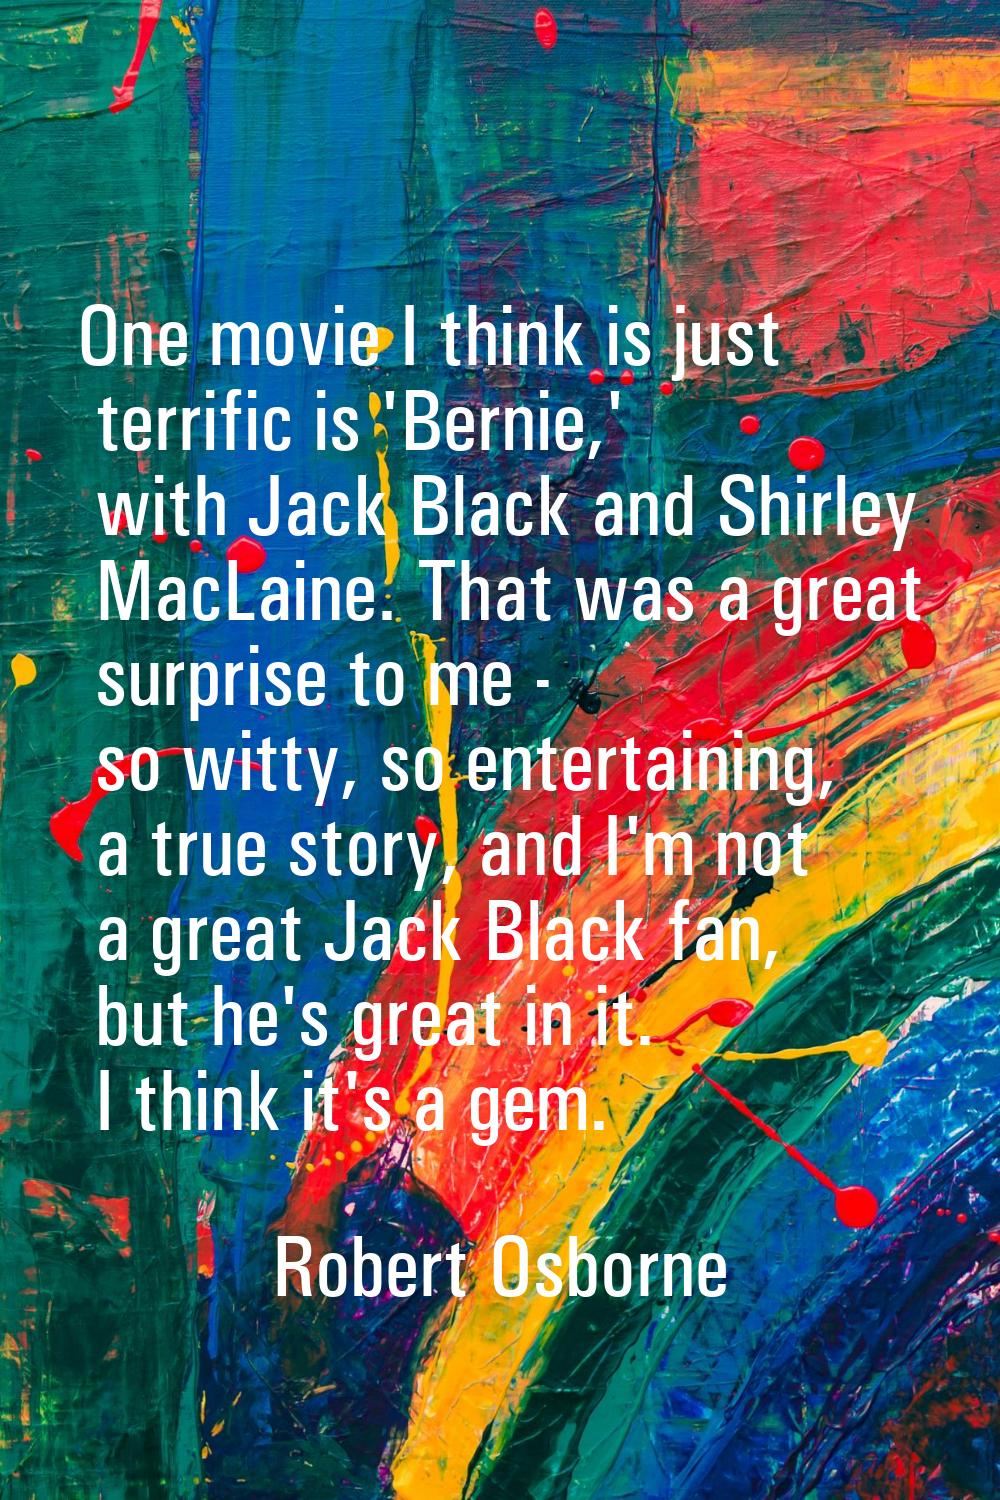 One movie I think is just terrific is 'Bernie,' with Jack Black and Shirley MacLaine. That was a gr